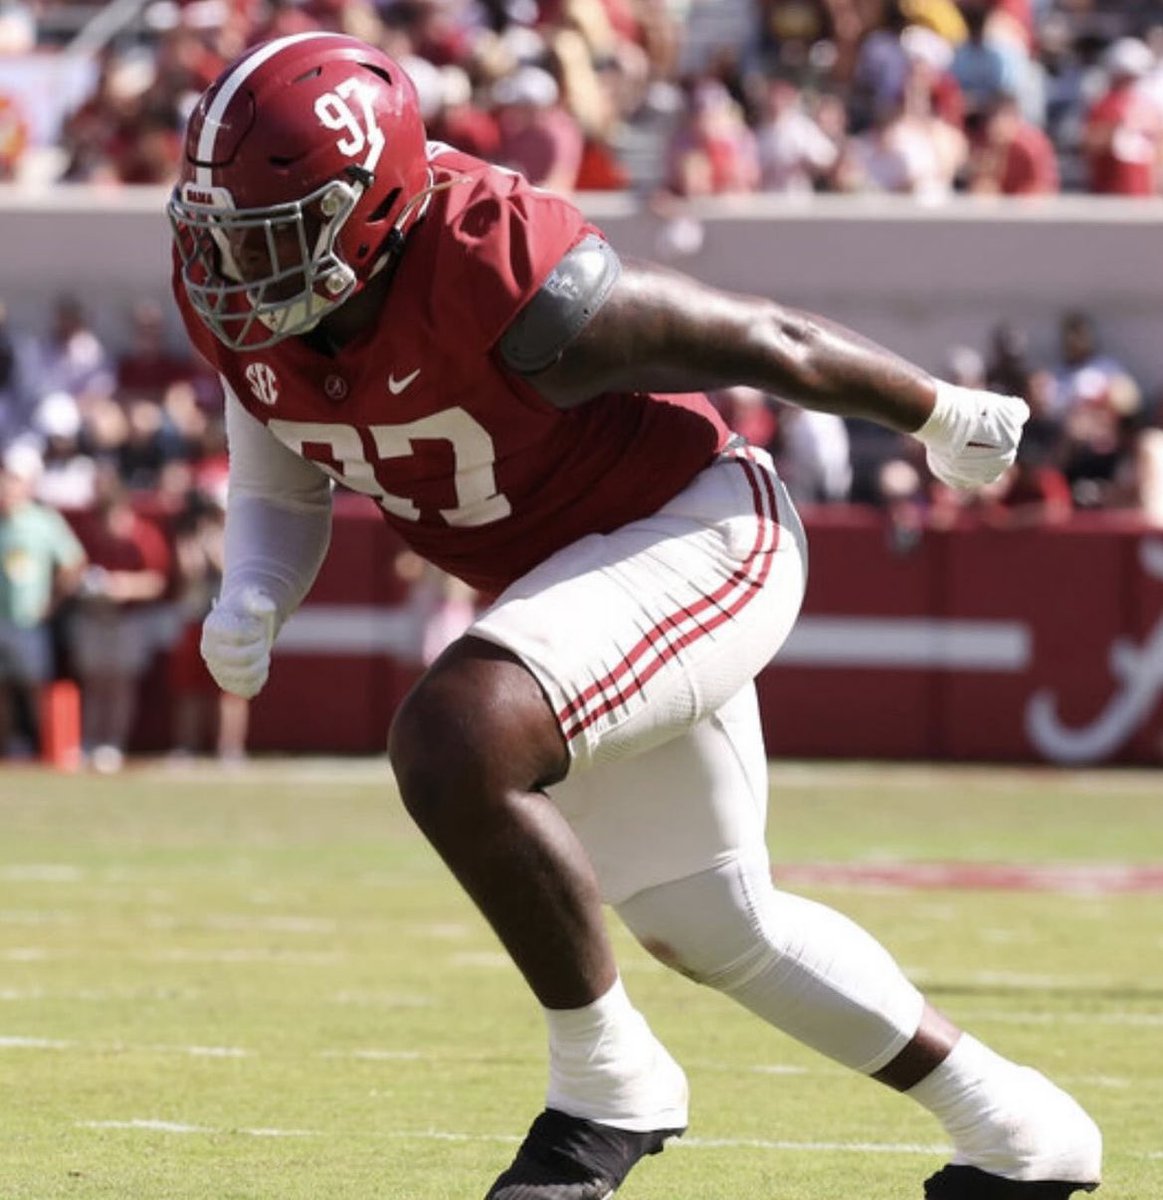 BREAKING: Alabama defensive lineman Khurtiss Perry is expected to enter the transfer portal. Perry is a former four-star recruit out of Pike Road High School in Pike Road, Alabama. In two seasons in Tuscaloosa, Perry did not record any stats. Perry is the first scholarship